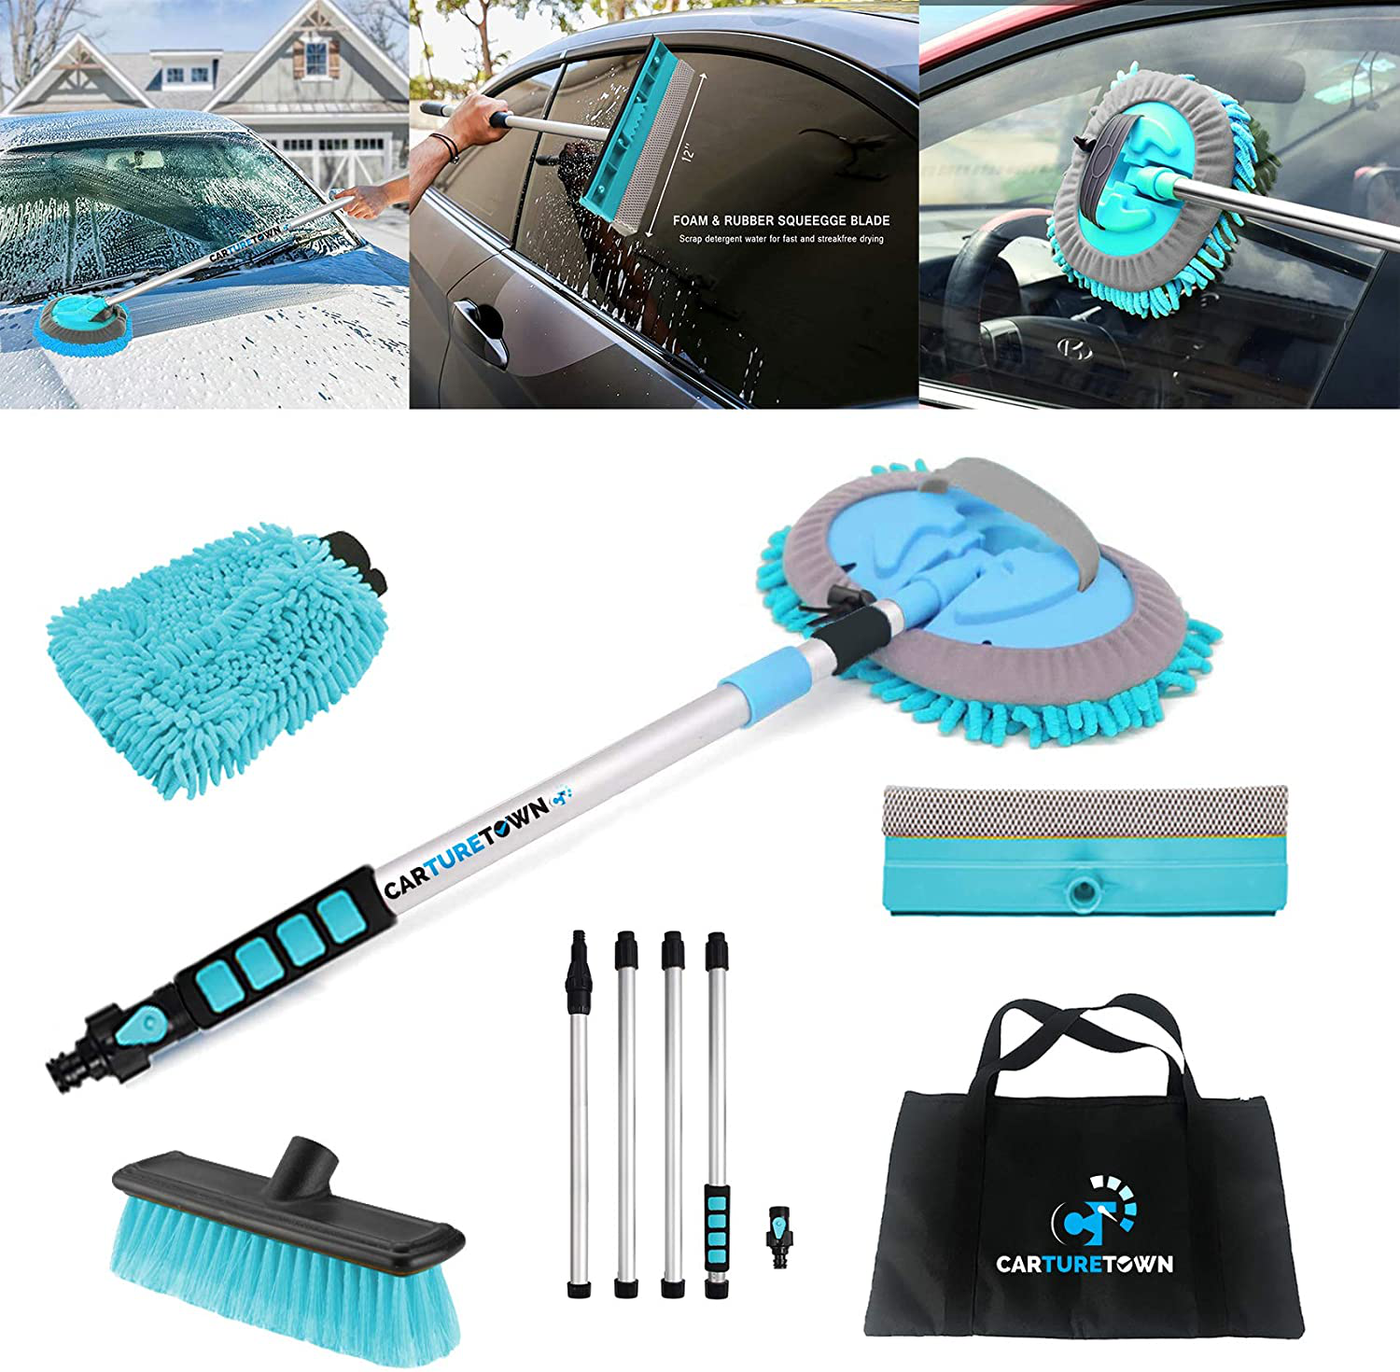 CARTURETOWN 10 Pieces Car Wash Cleaning Kit- Long Handle Brush, Soft Bristle Exterior Duster, Scratch Free Mitt, Squeegee and Hose Attachment - Essential Supplies for Auto Care, Washing and Scrubbing